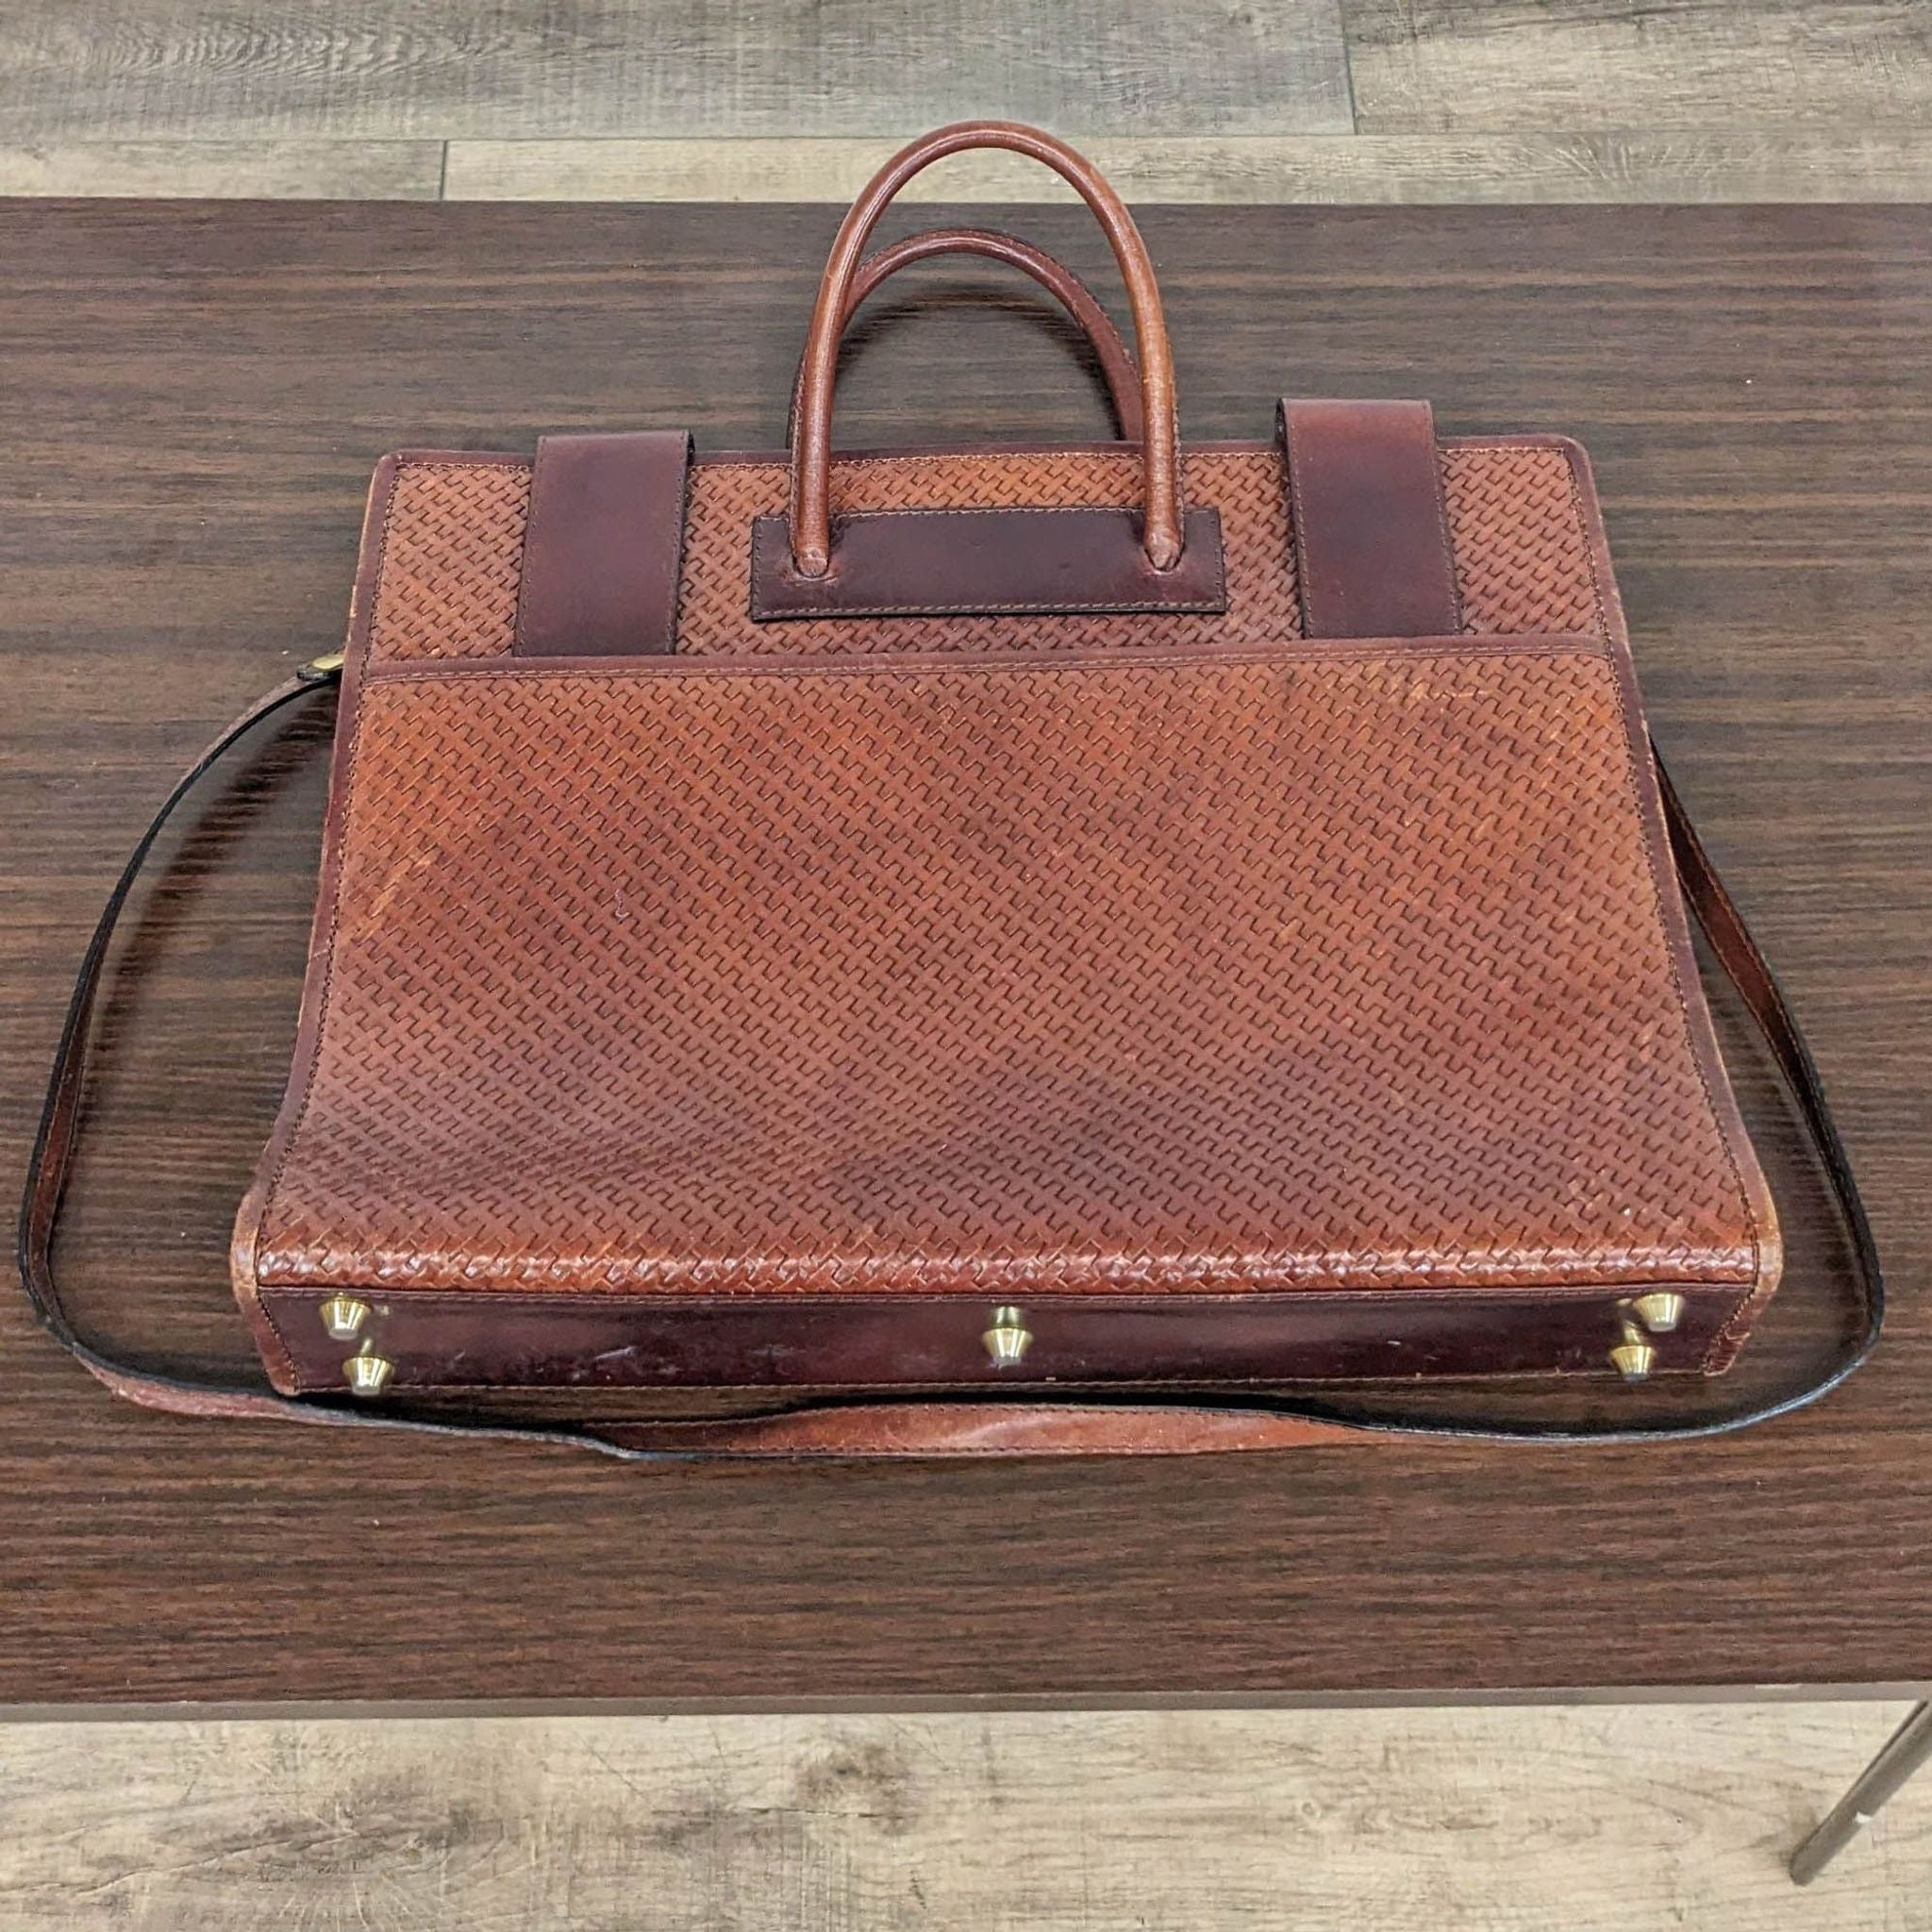 Top-down view of a textured brown Bosca leather briefcase with handles and shoulder strap on a wooden table.